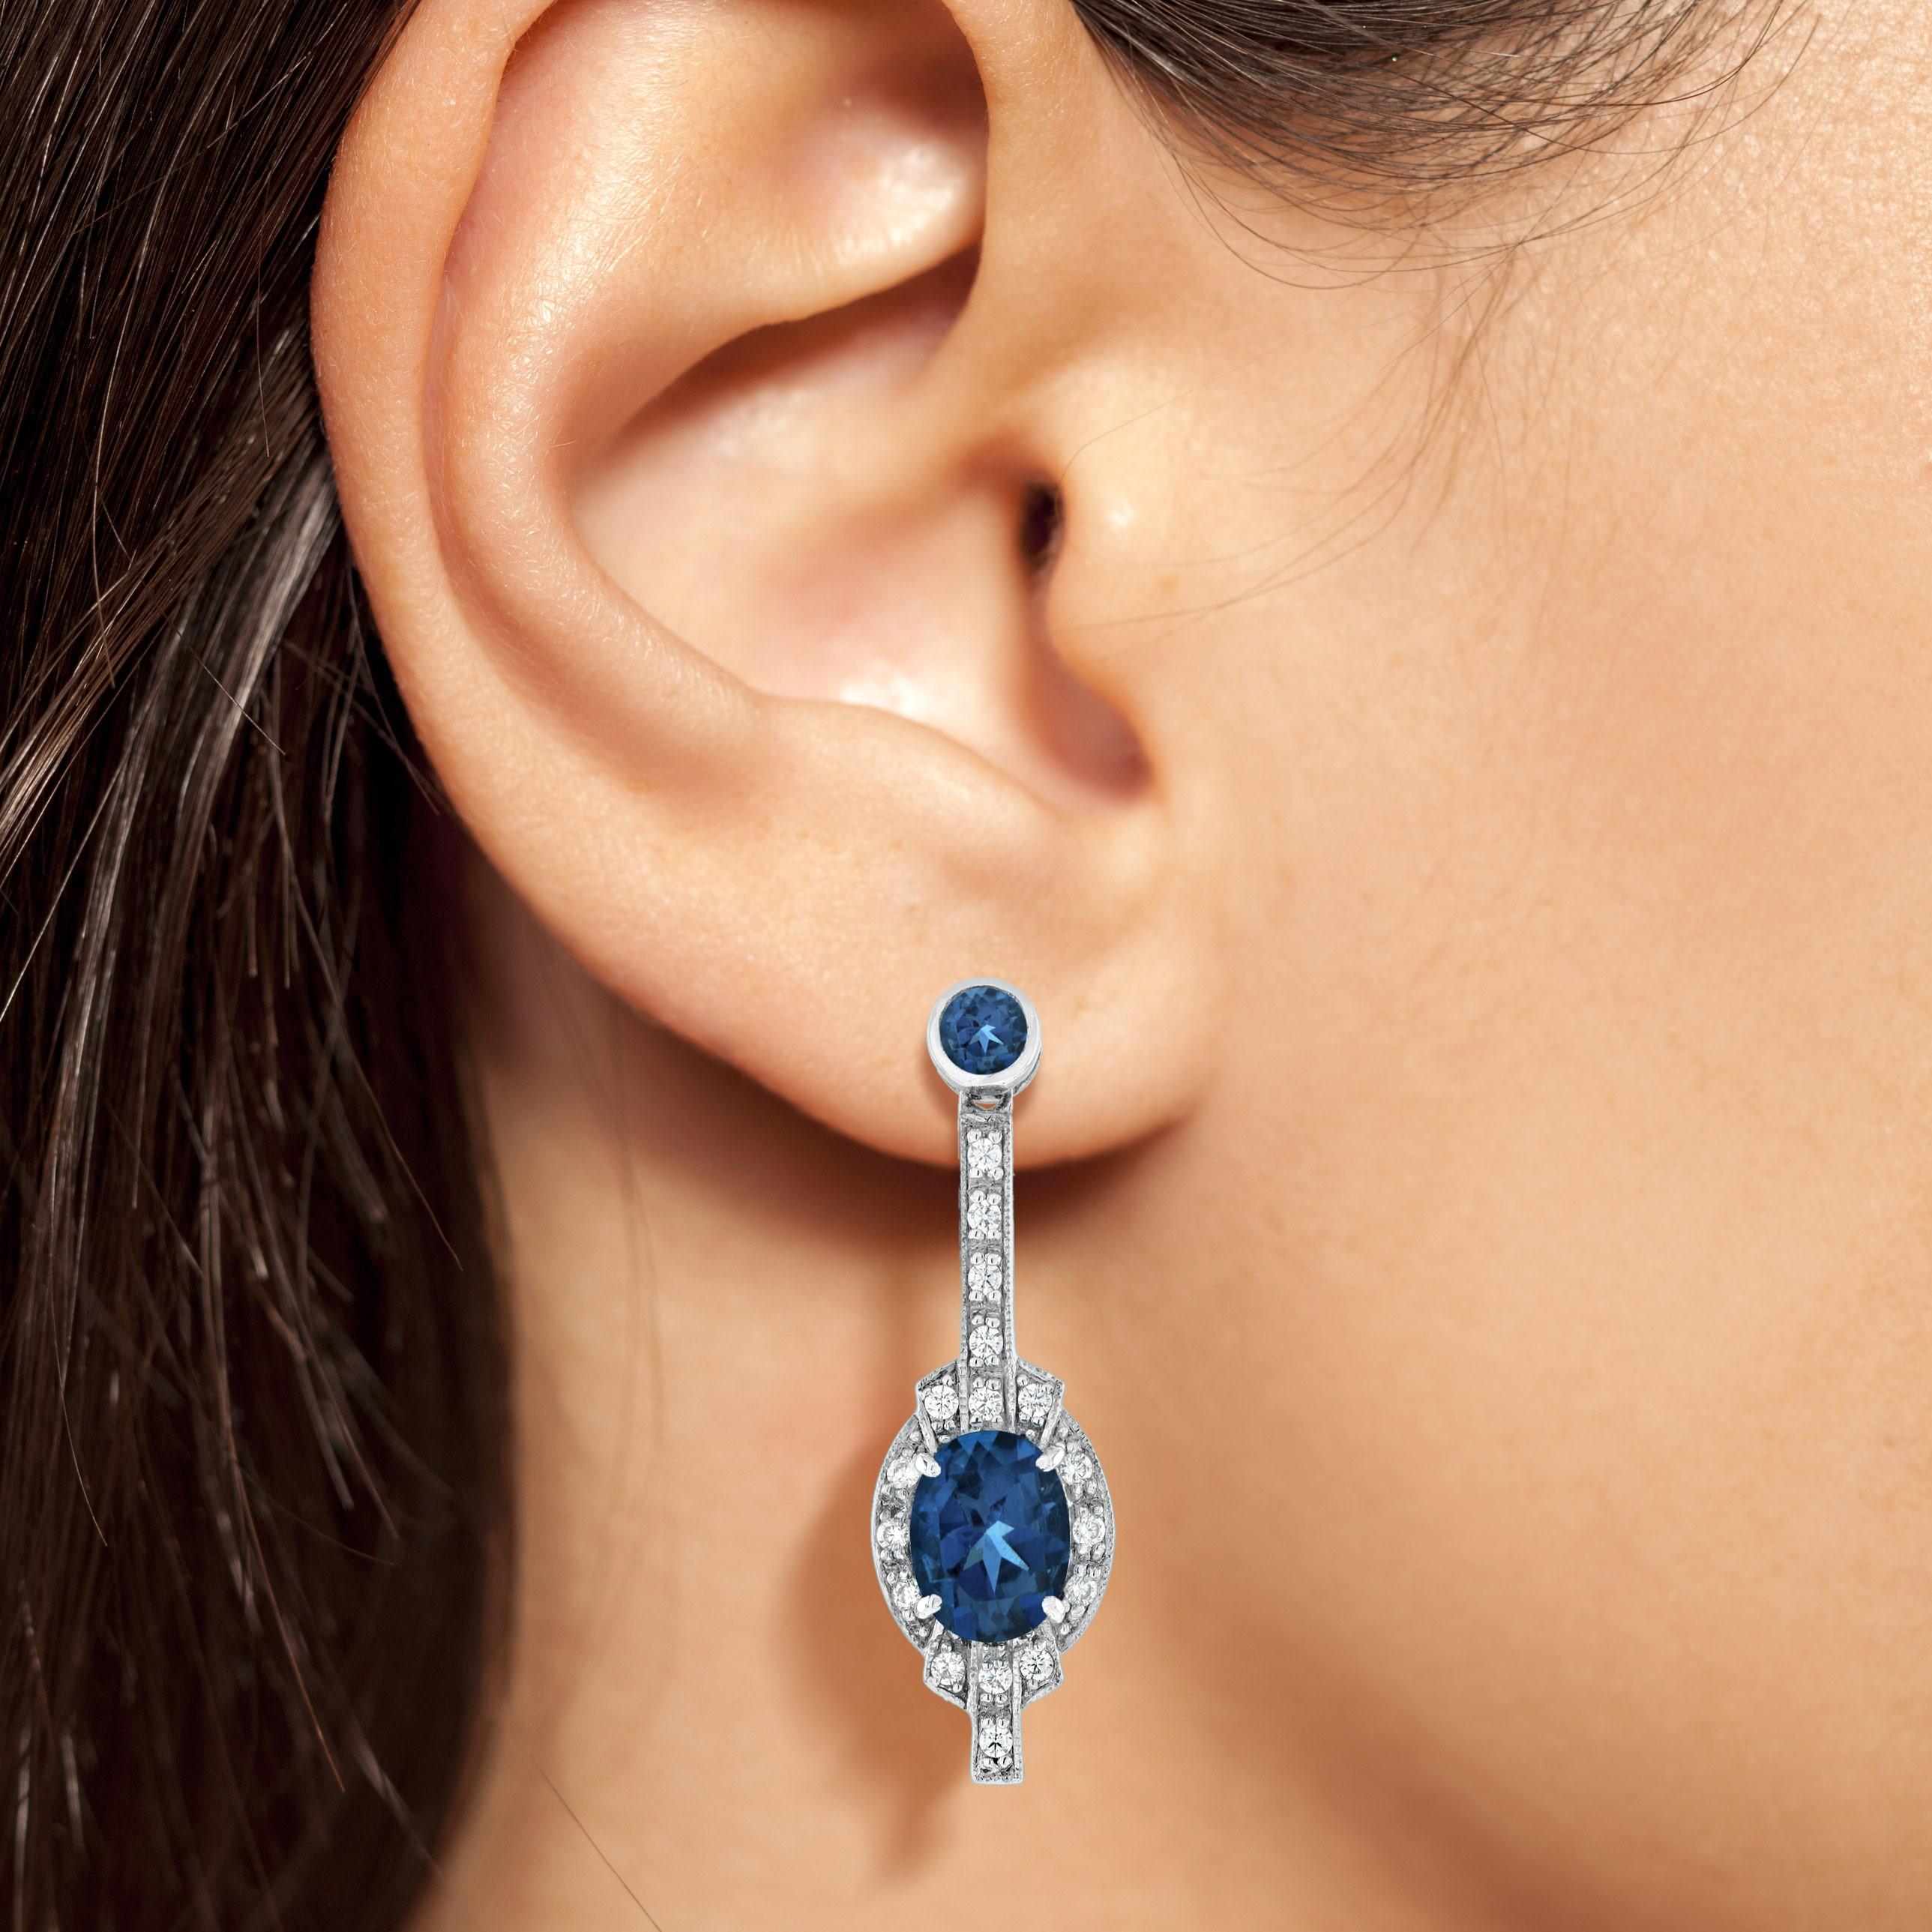 These elegant and incredible 18k white gold Art Deco style earrings feature an oval cut London blue topaz, each totaling approximately 3.20 carat in weight, measuring 8 mm. x 6 mm. Both topaz are intensely saturated with that deep blue color. Each